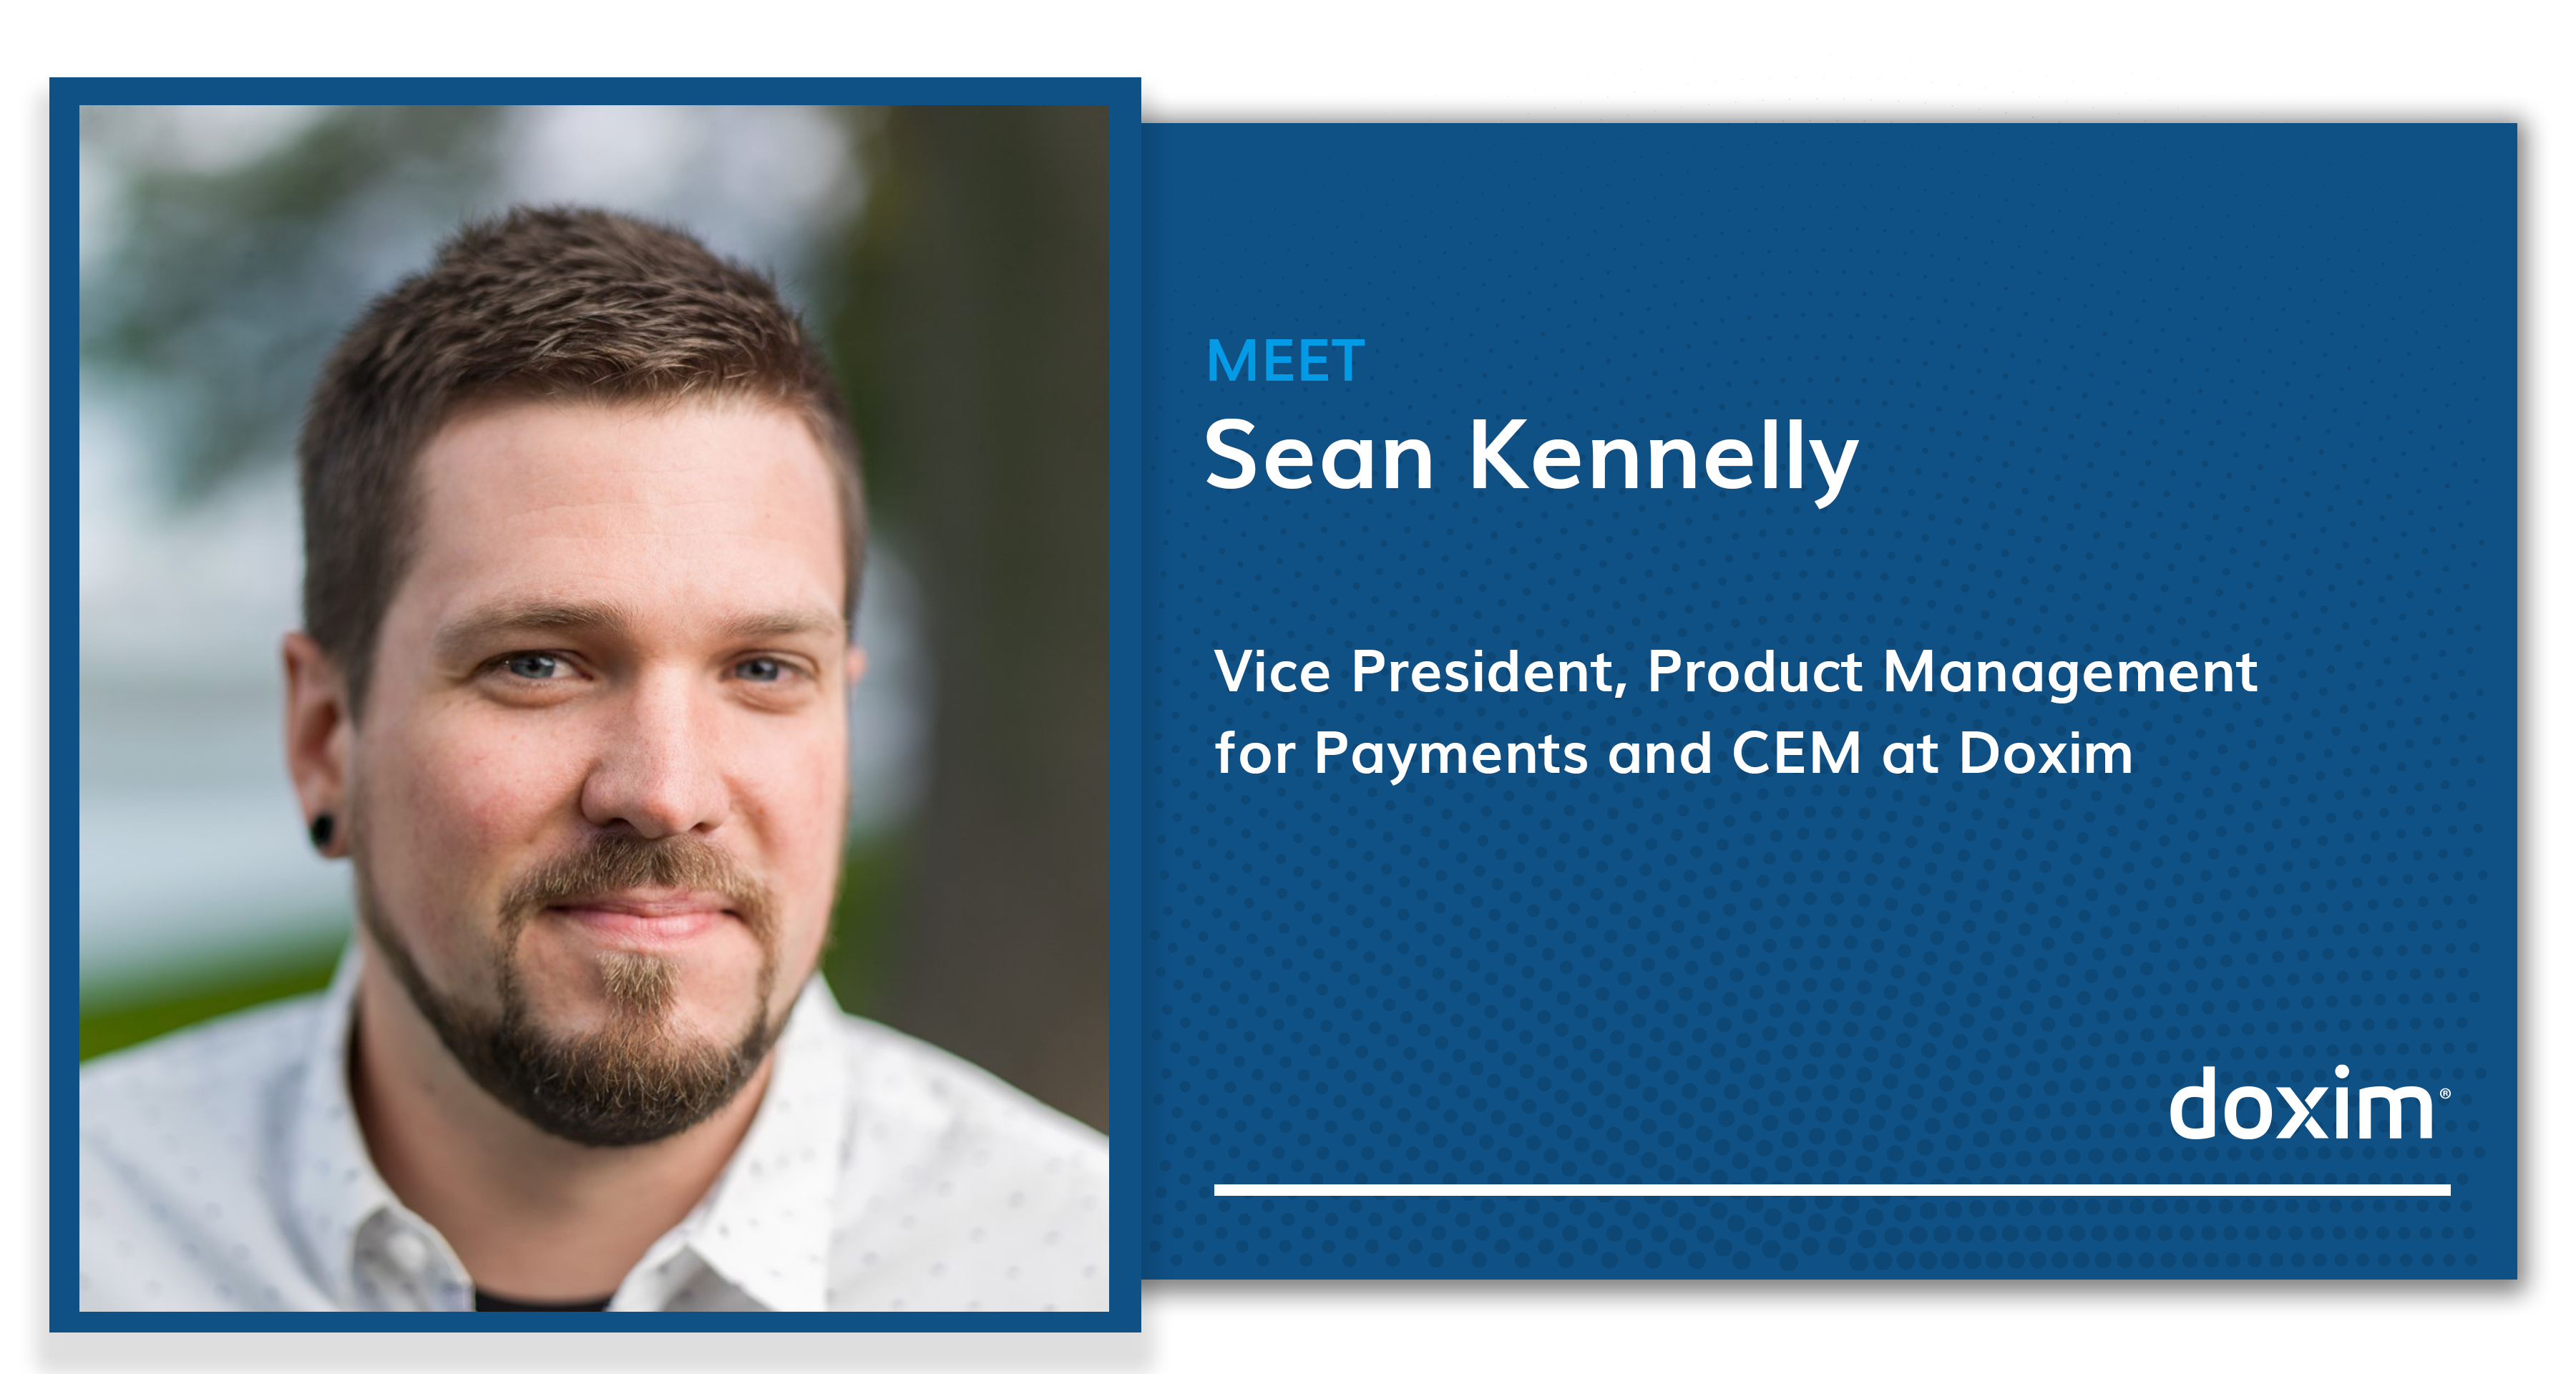 Introducing Sean Kennelly – Vice President, Product Management for Payments and CEM at Doxim